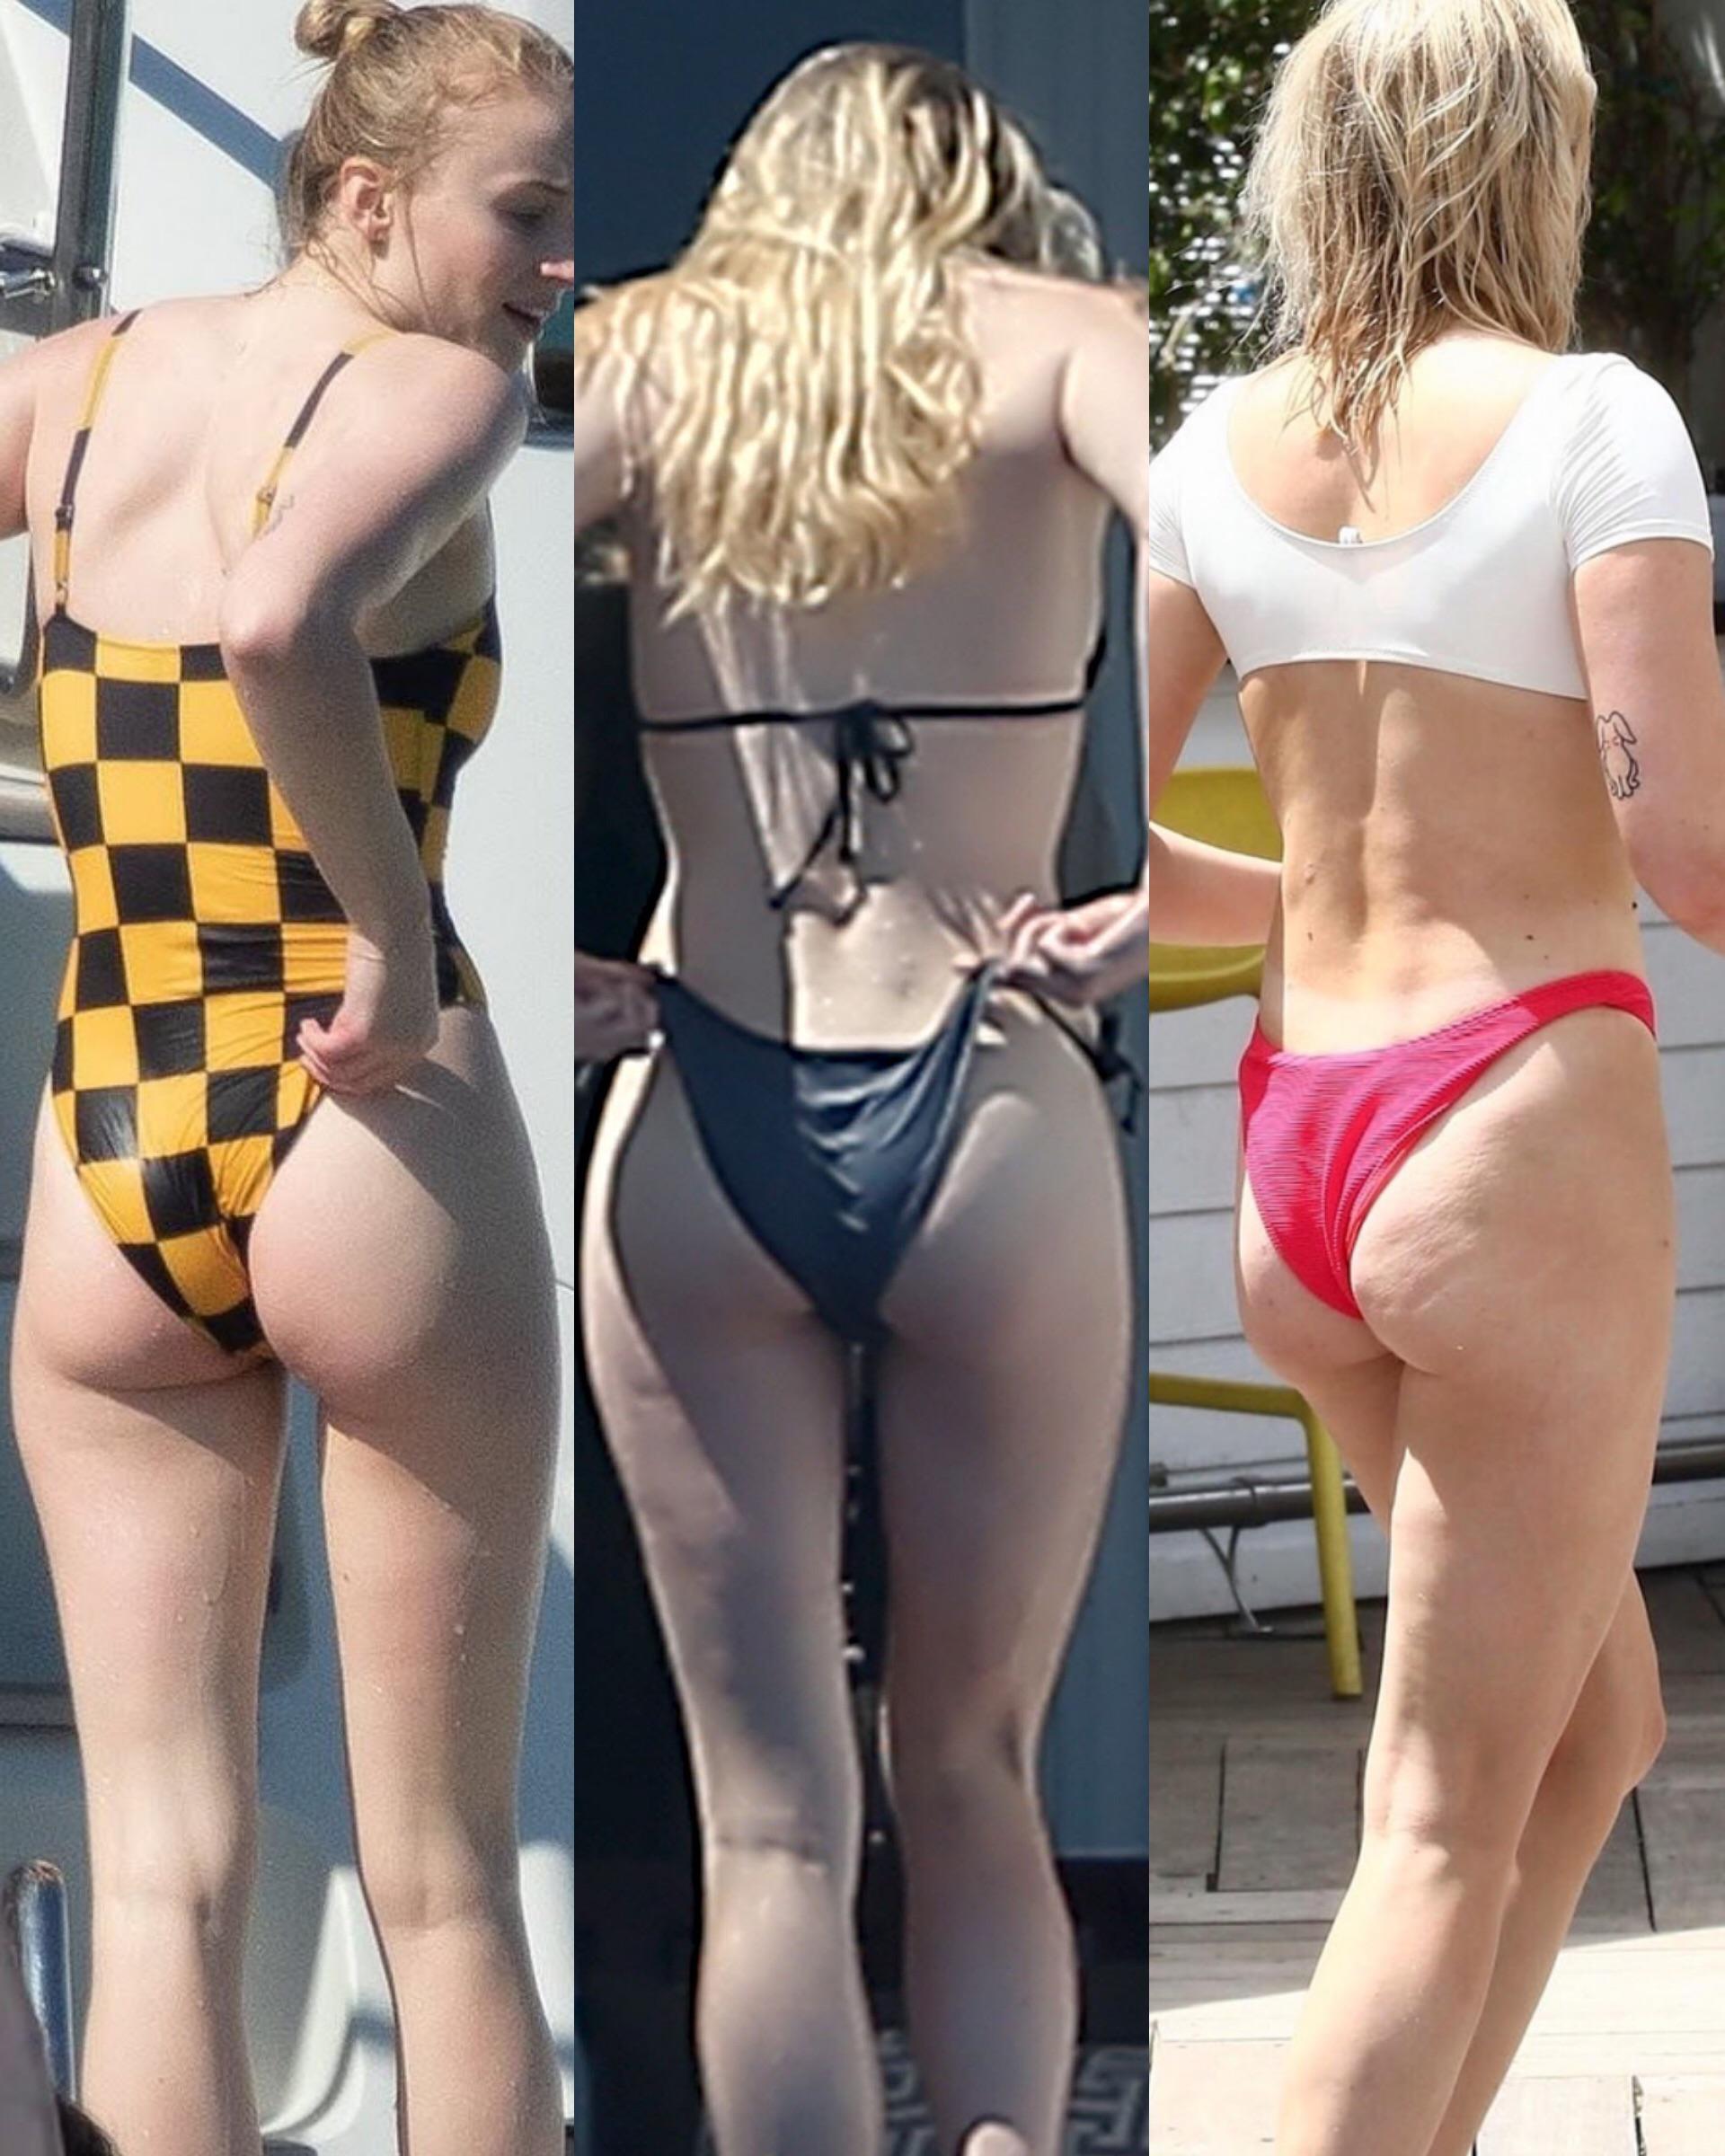 I really, really want to fuck Sophie Turner in the ass.